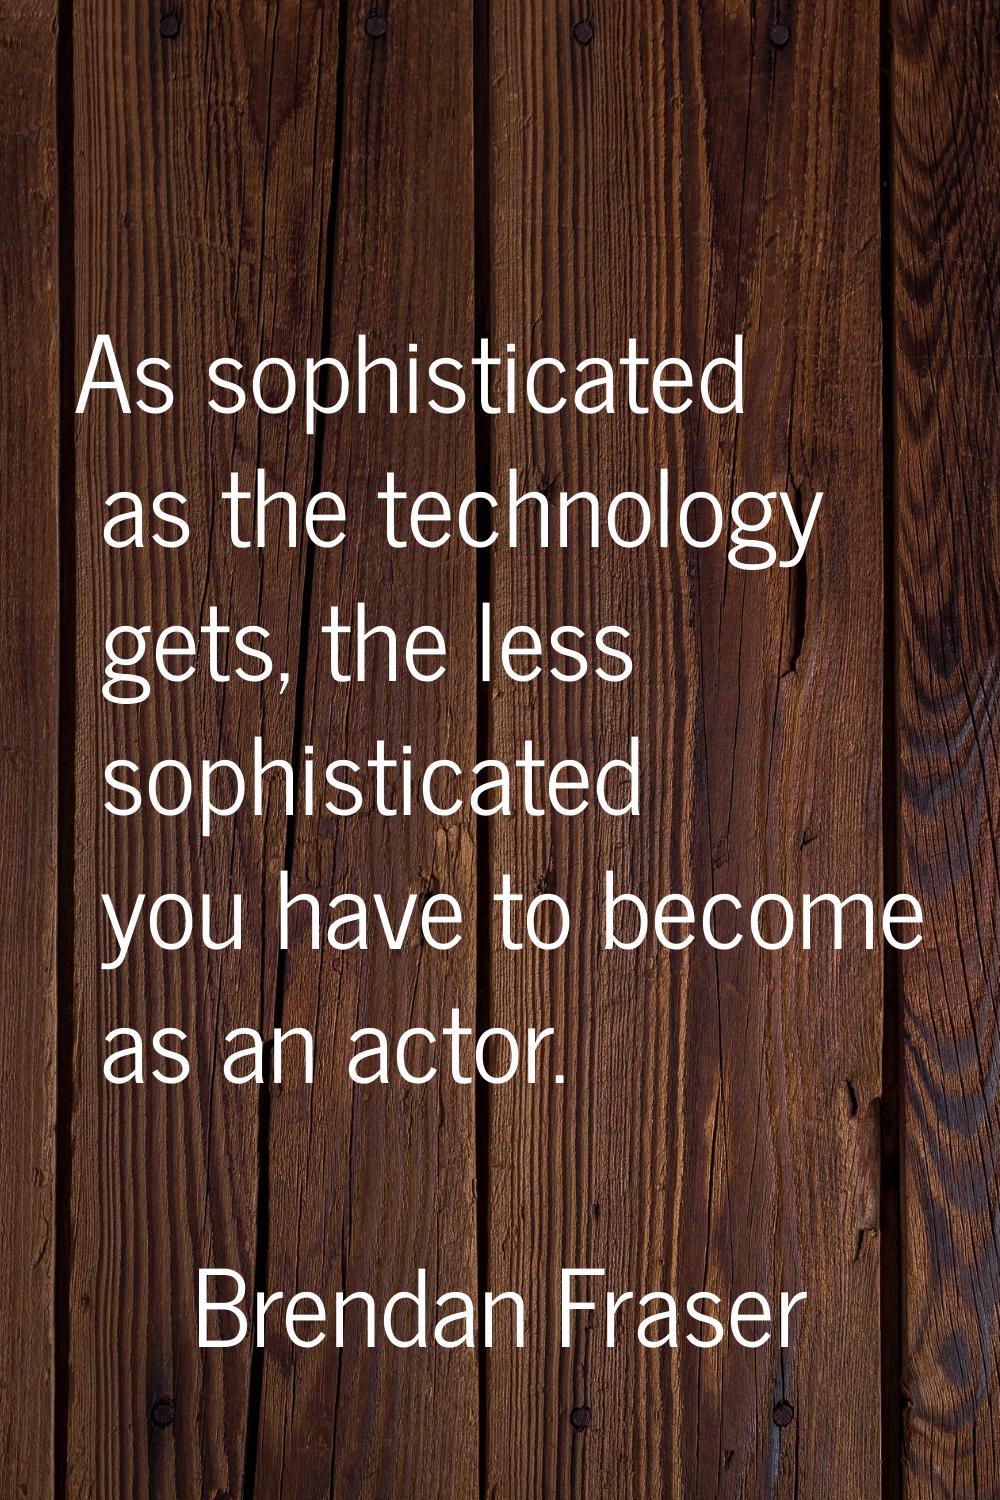 As sophisticated as the technology gets, the less sophisticated you have to become as an actor.